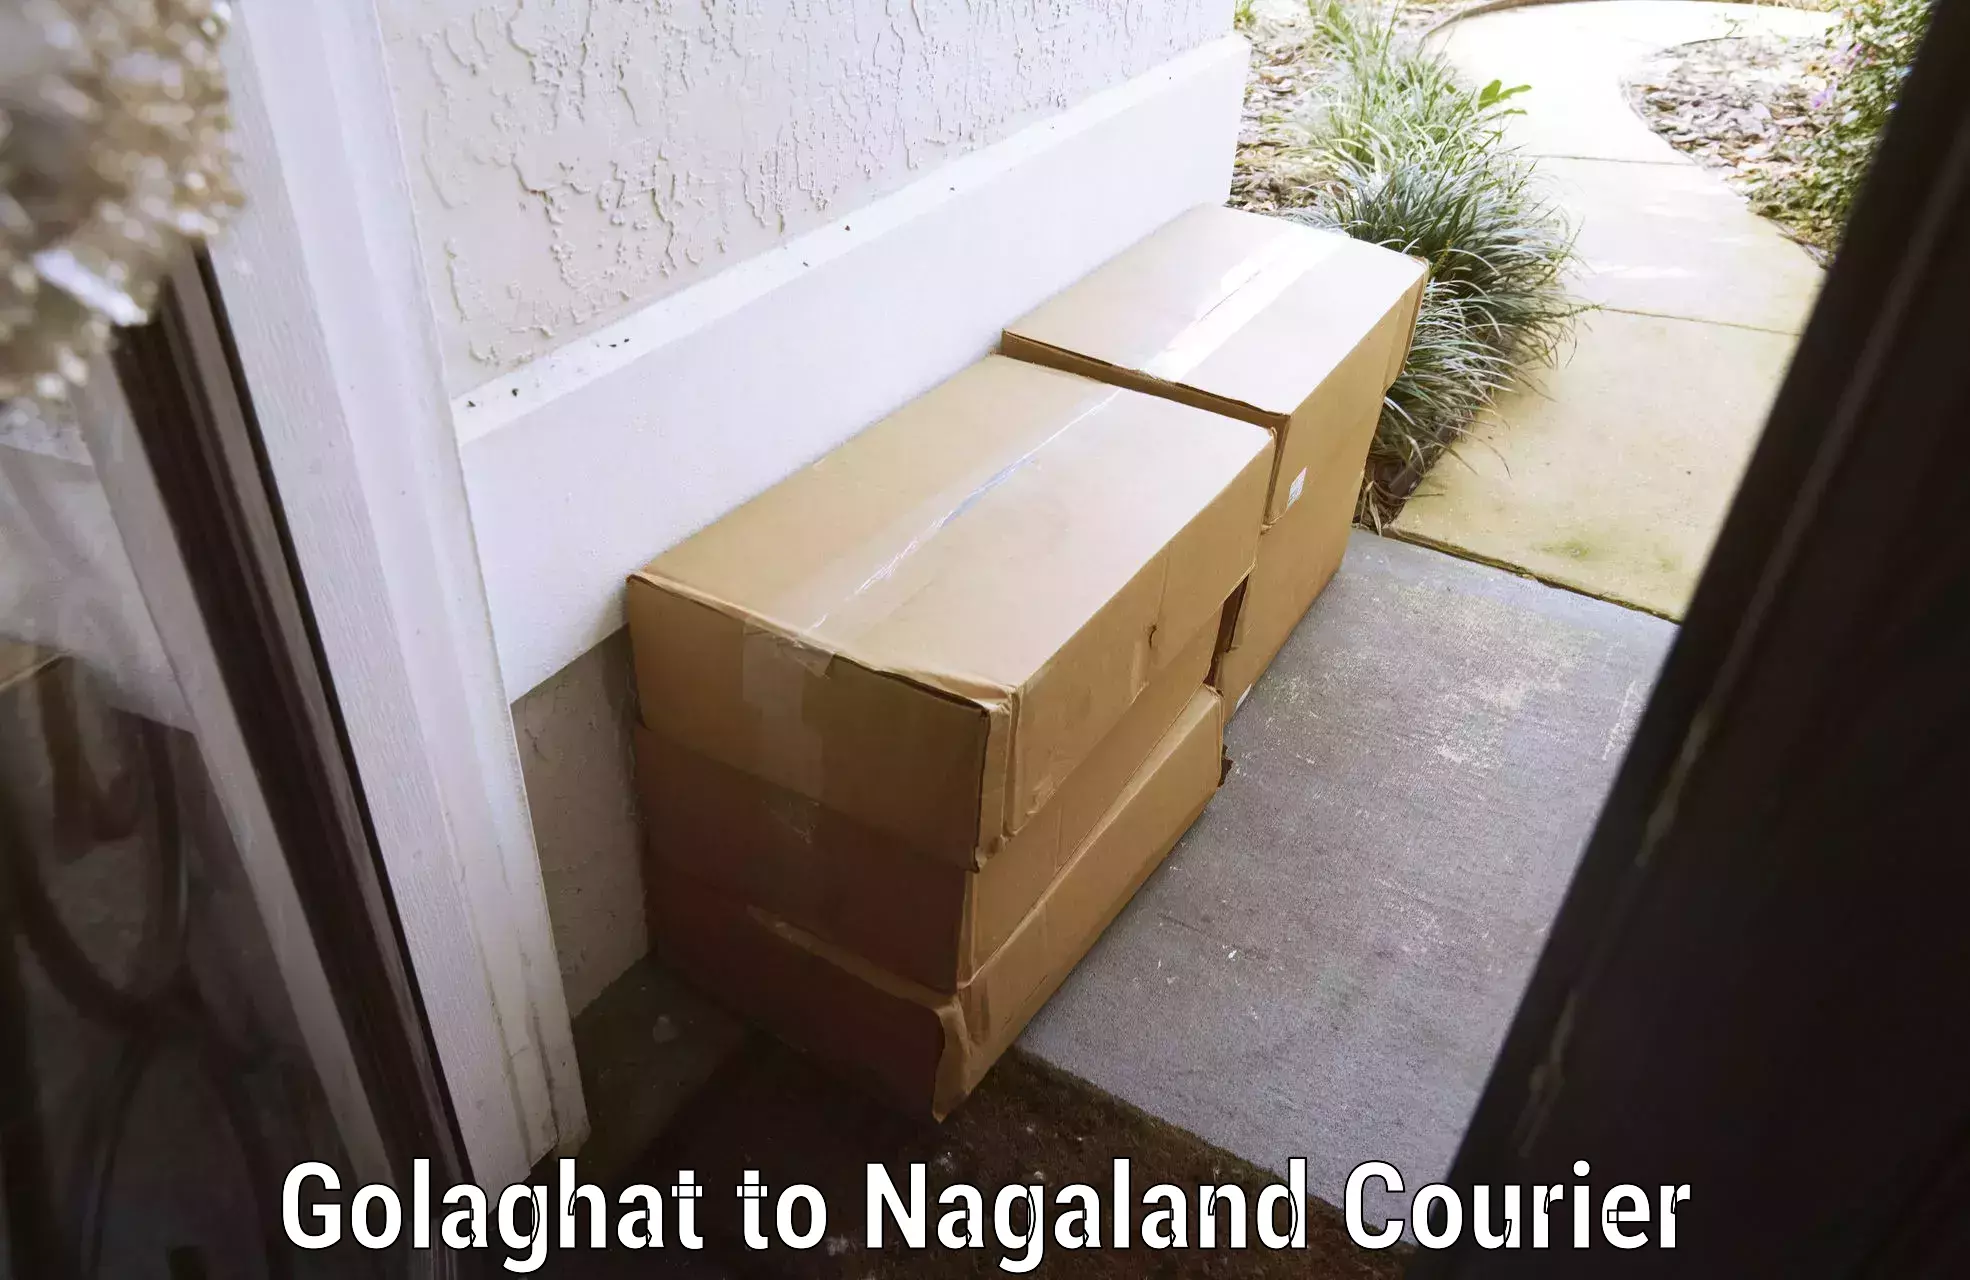 Luggage dispatch service Golaghat to Nagaland